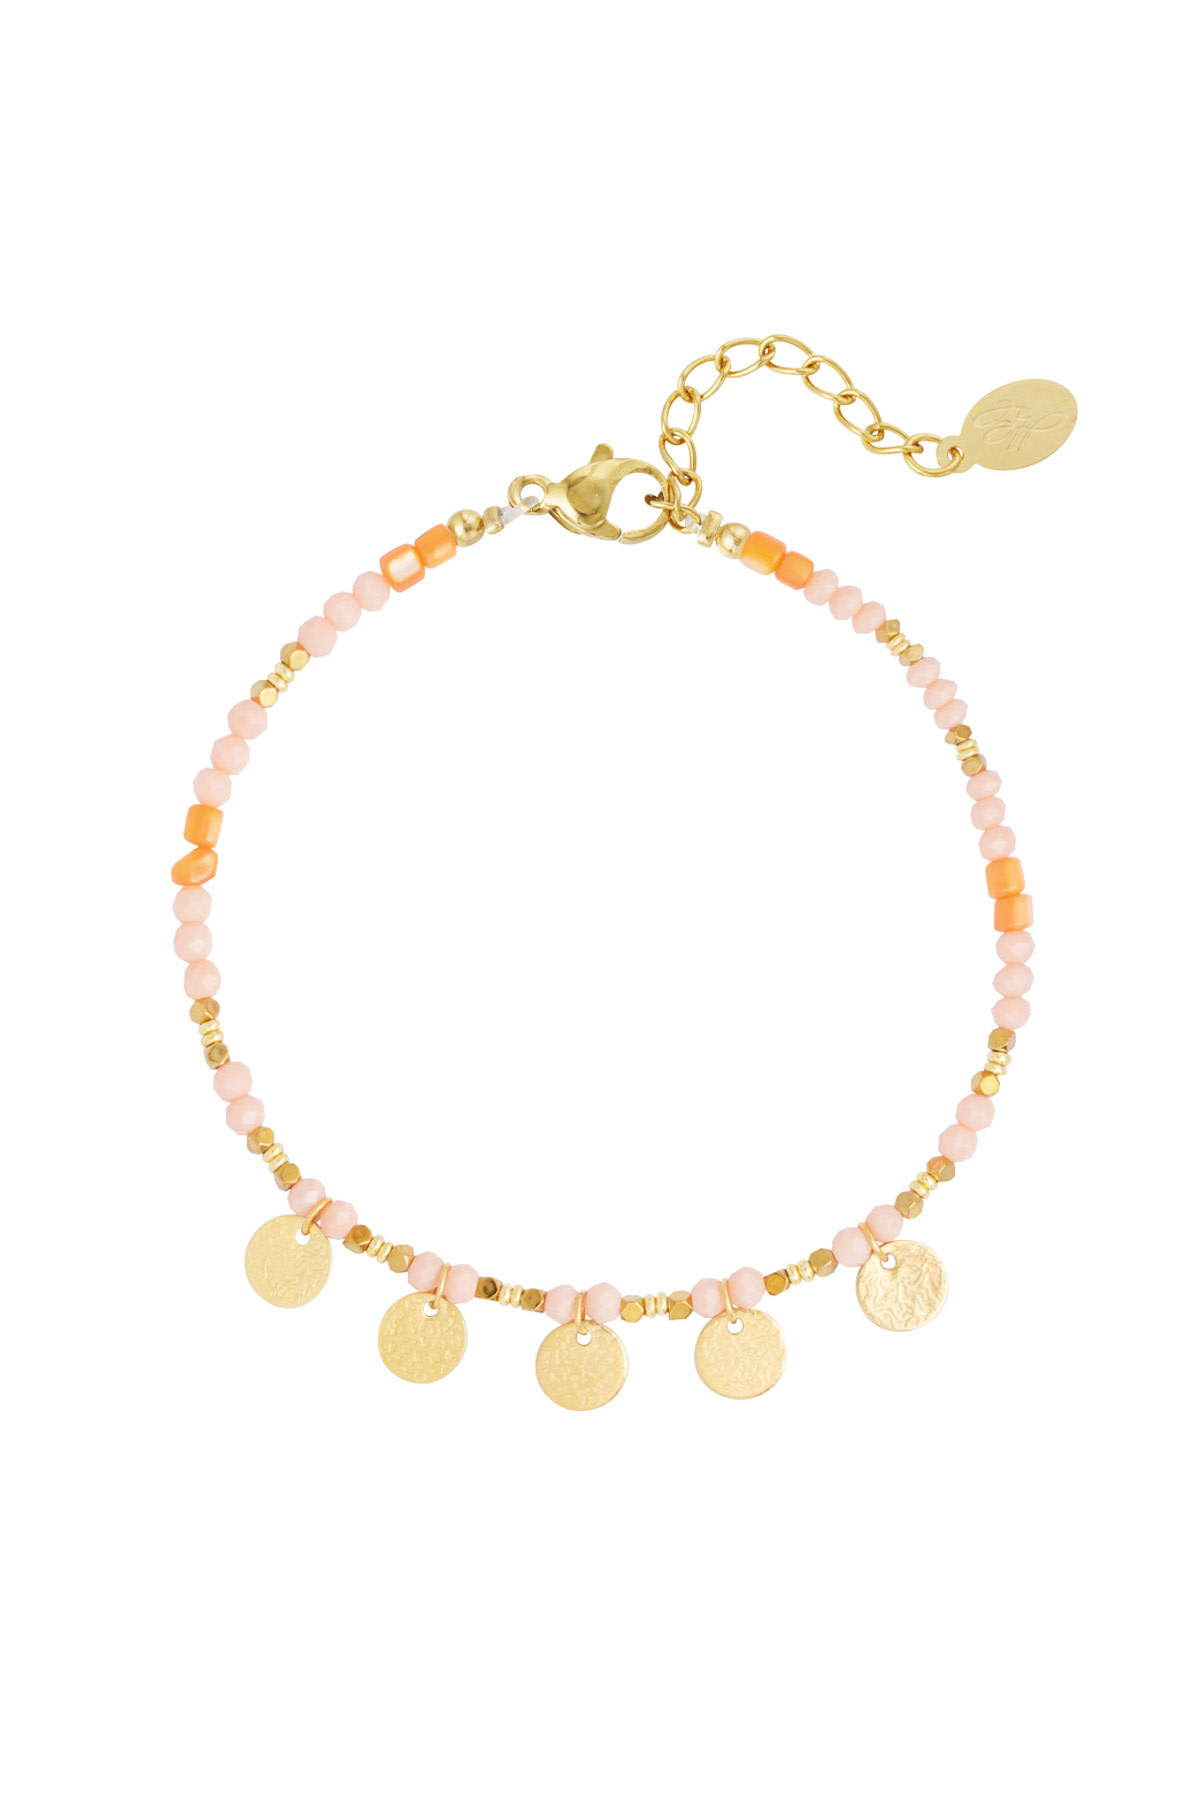 With love Anklet - charms - orange/ gold